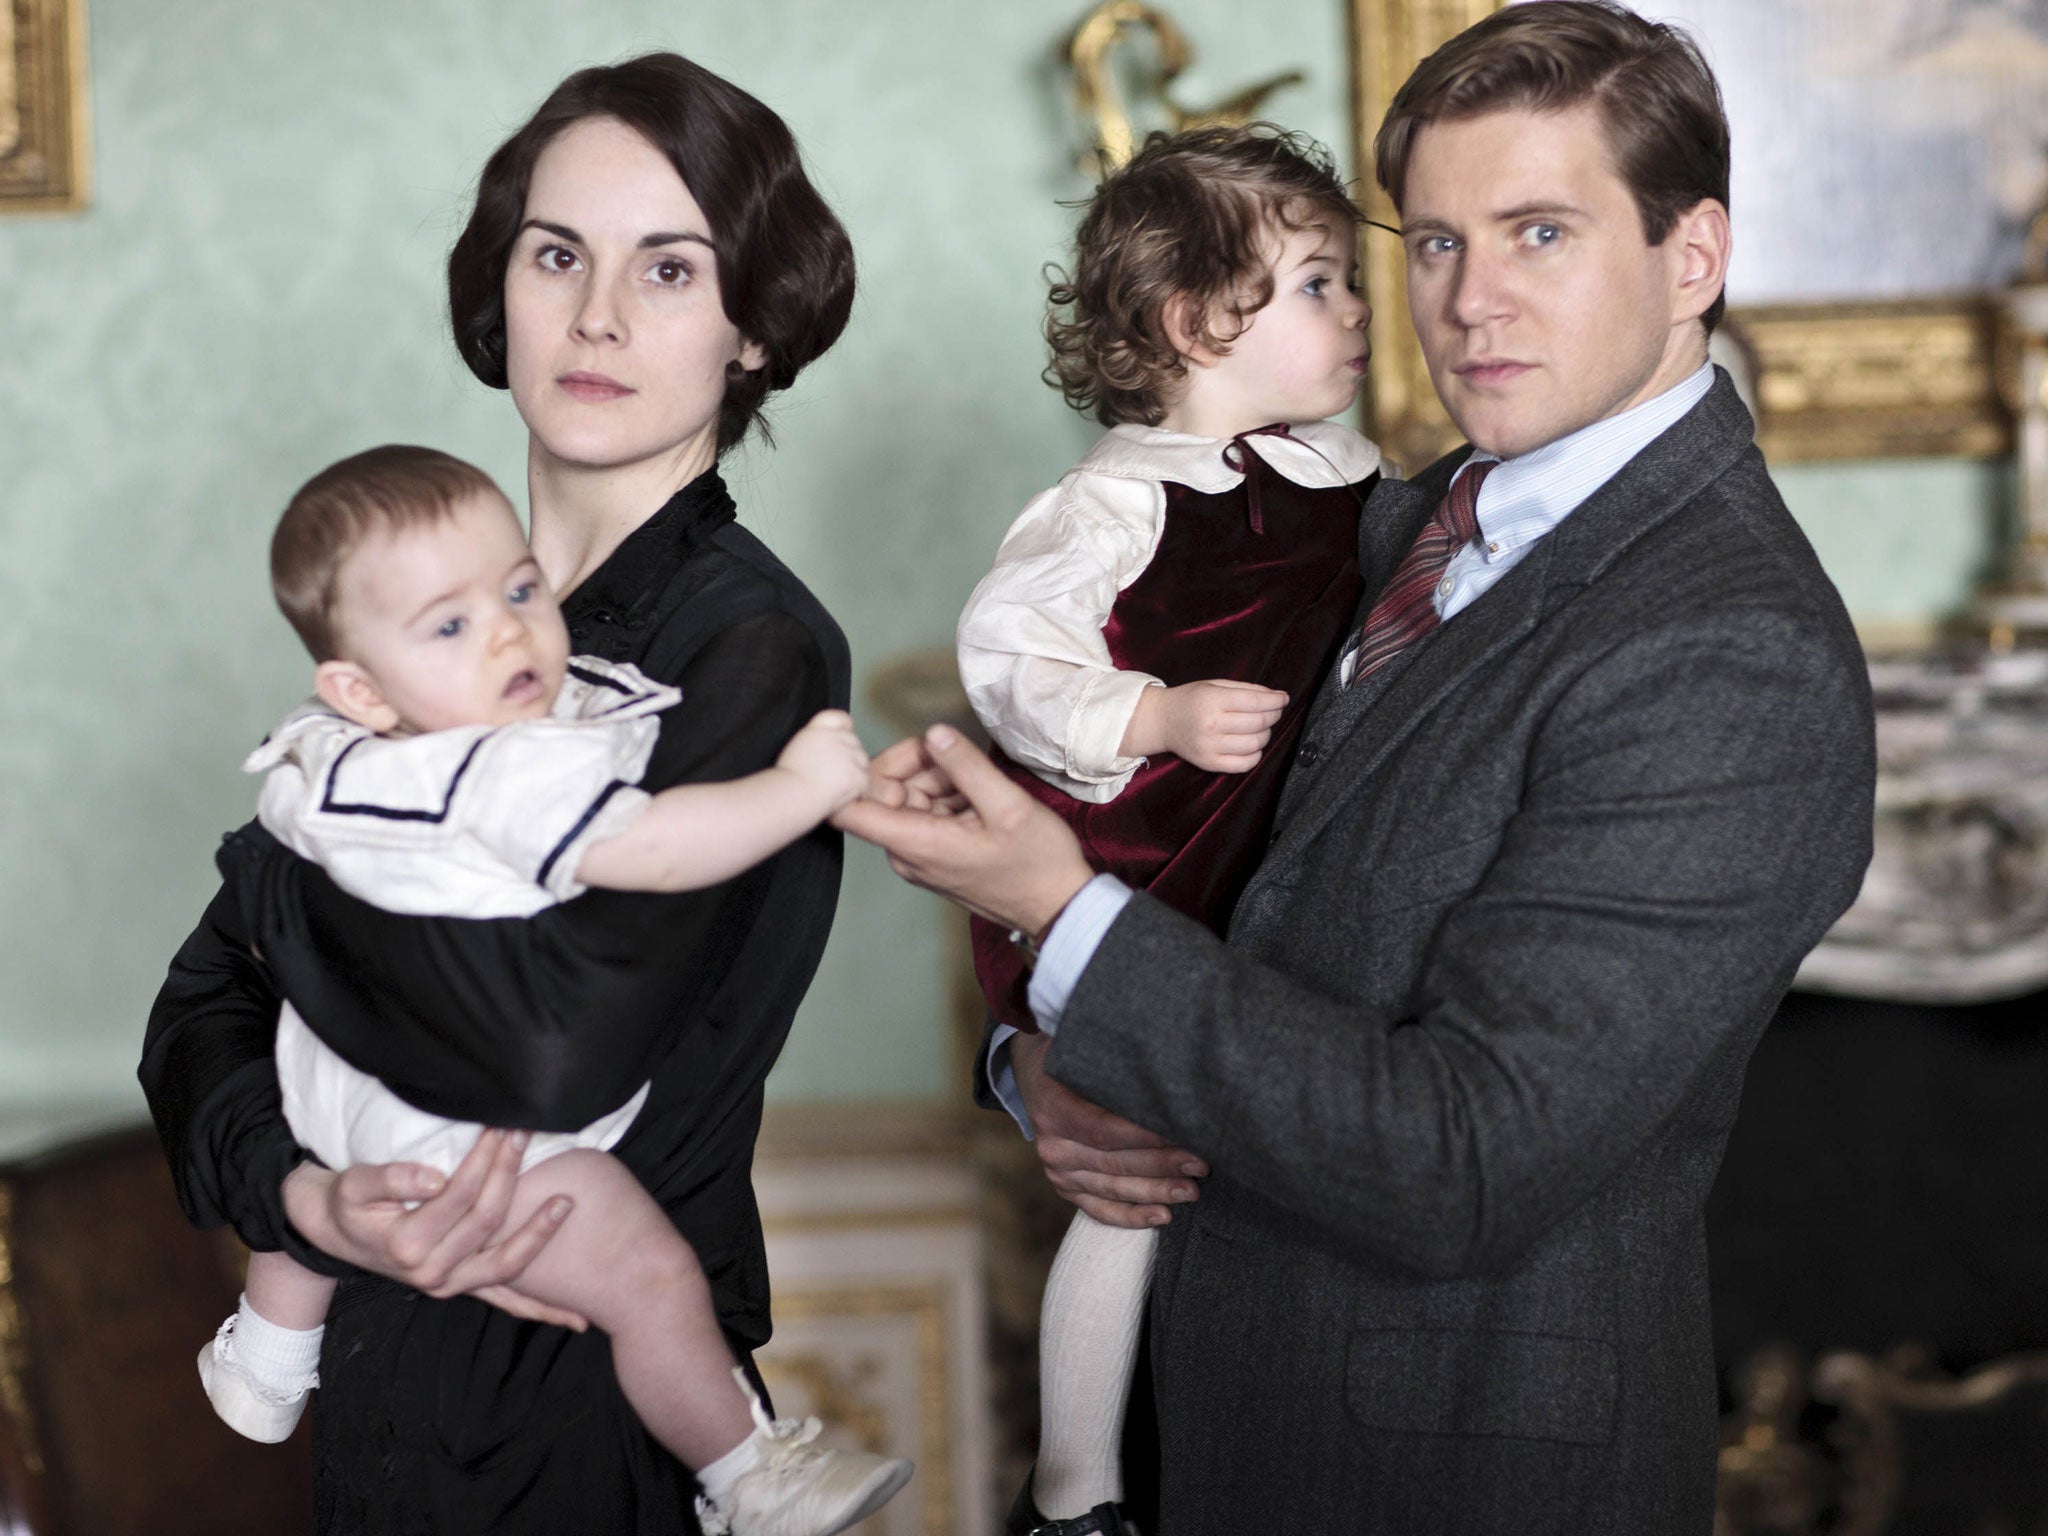 Posh parents: Downton Abbey’s Lady Mary with baby George, and Tom Branson with Sybbie